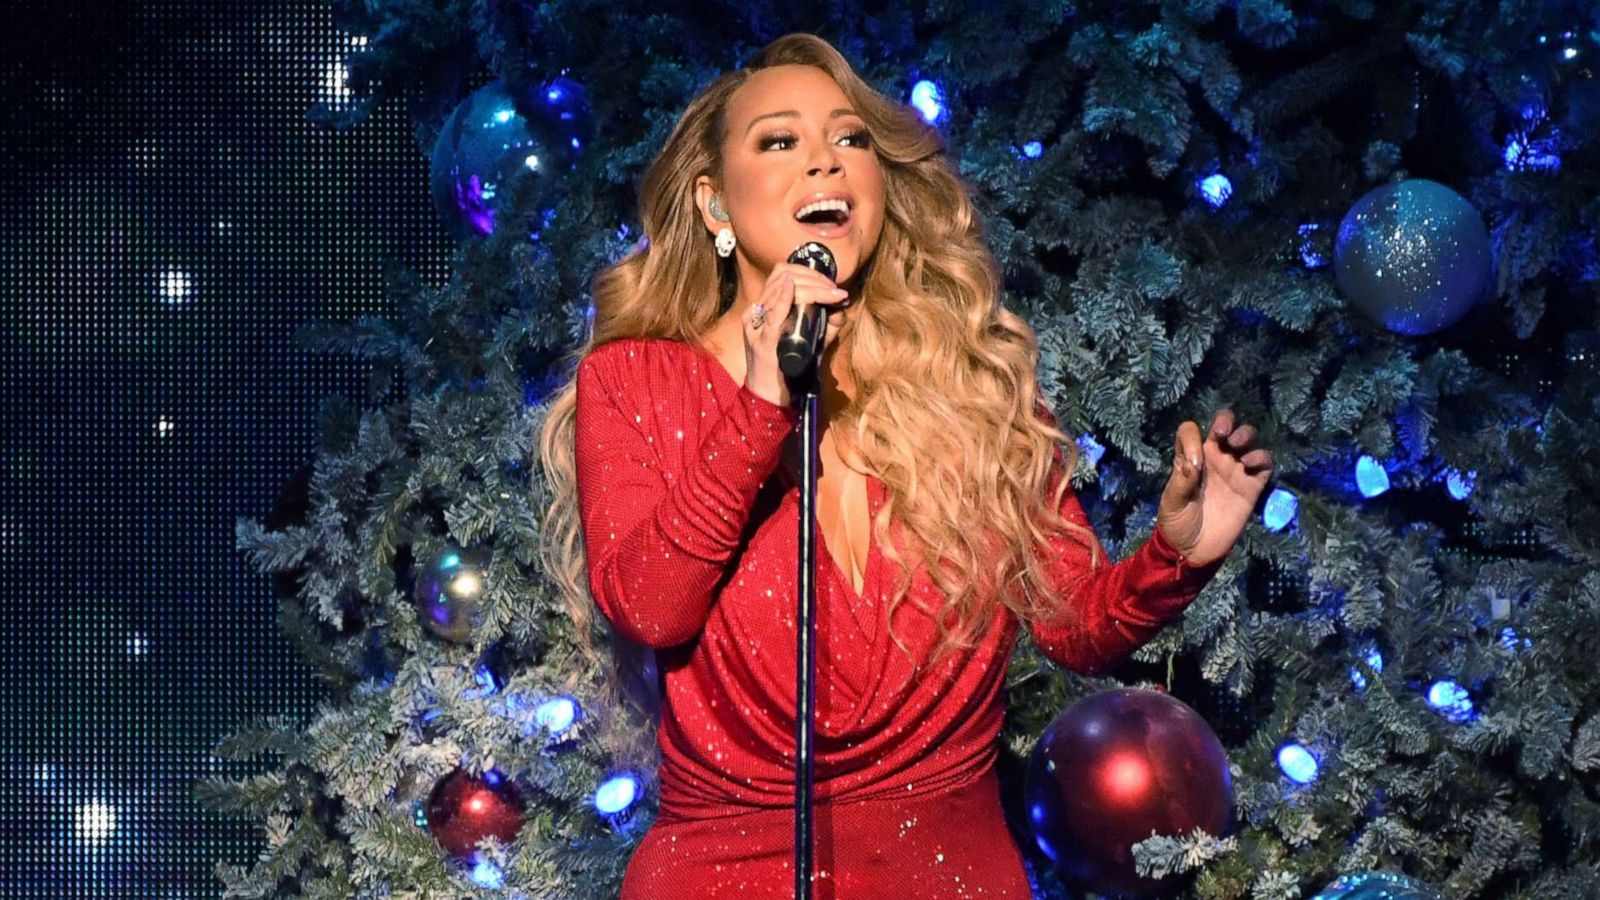 Mariah Carey S All I Want For Christmas Is You Tops Billboard Hot 100 For First Time Abc News